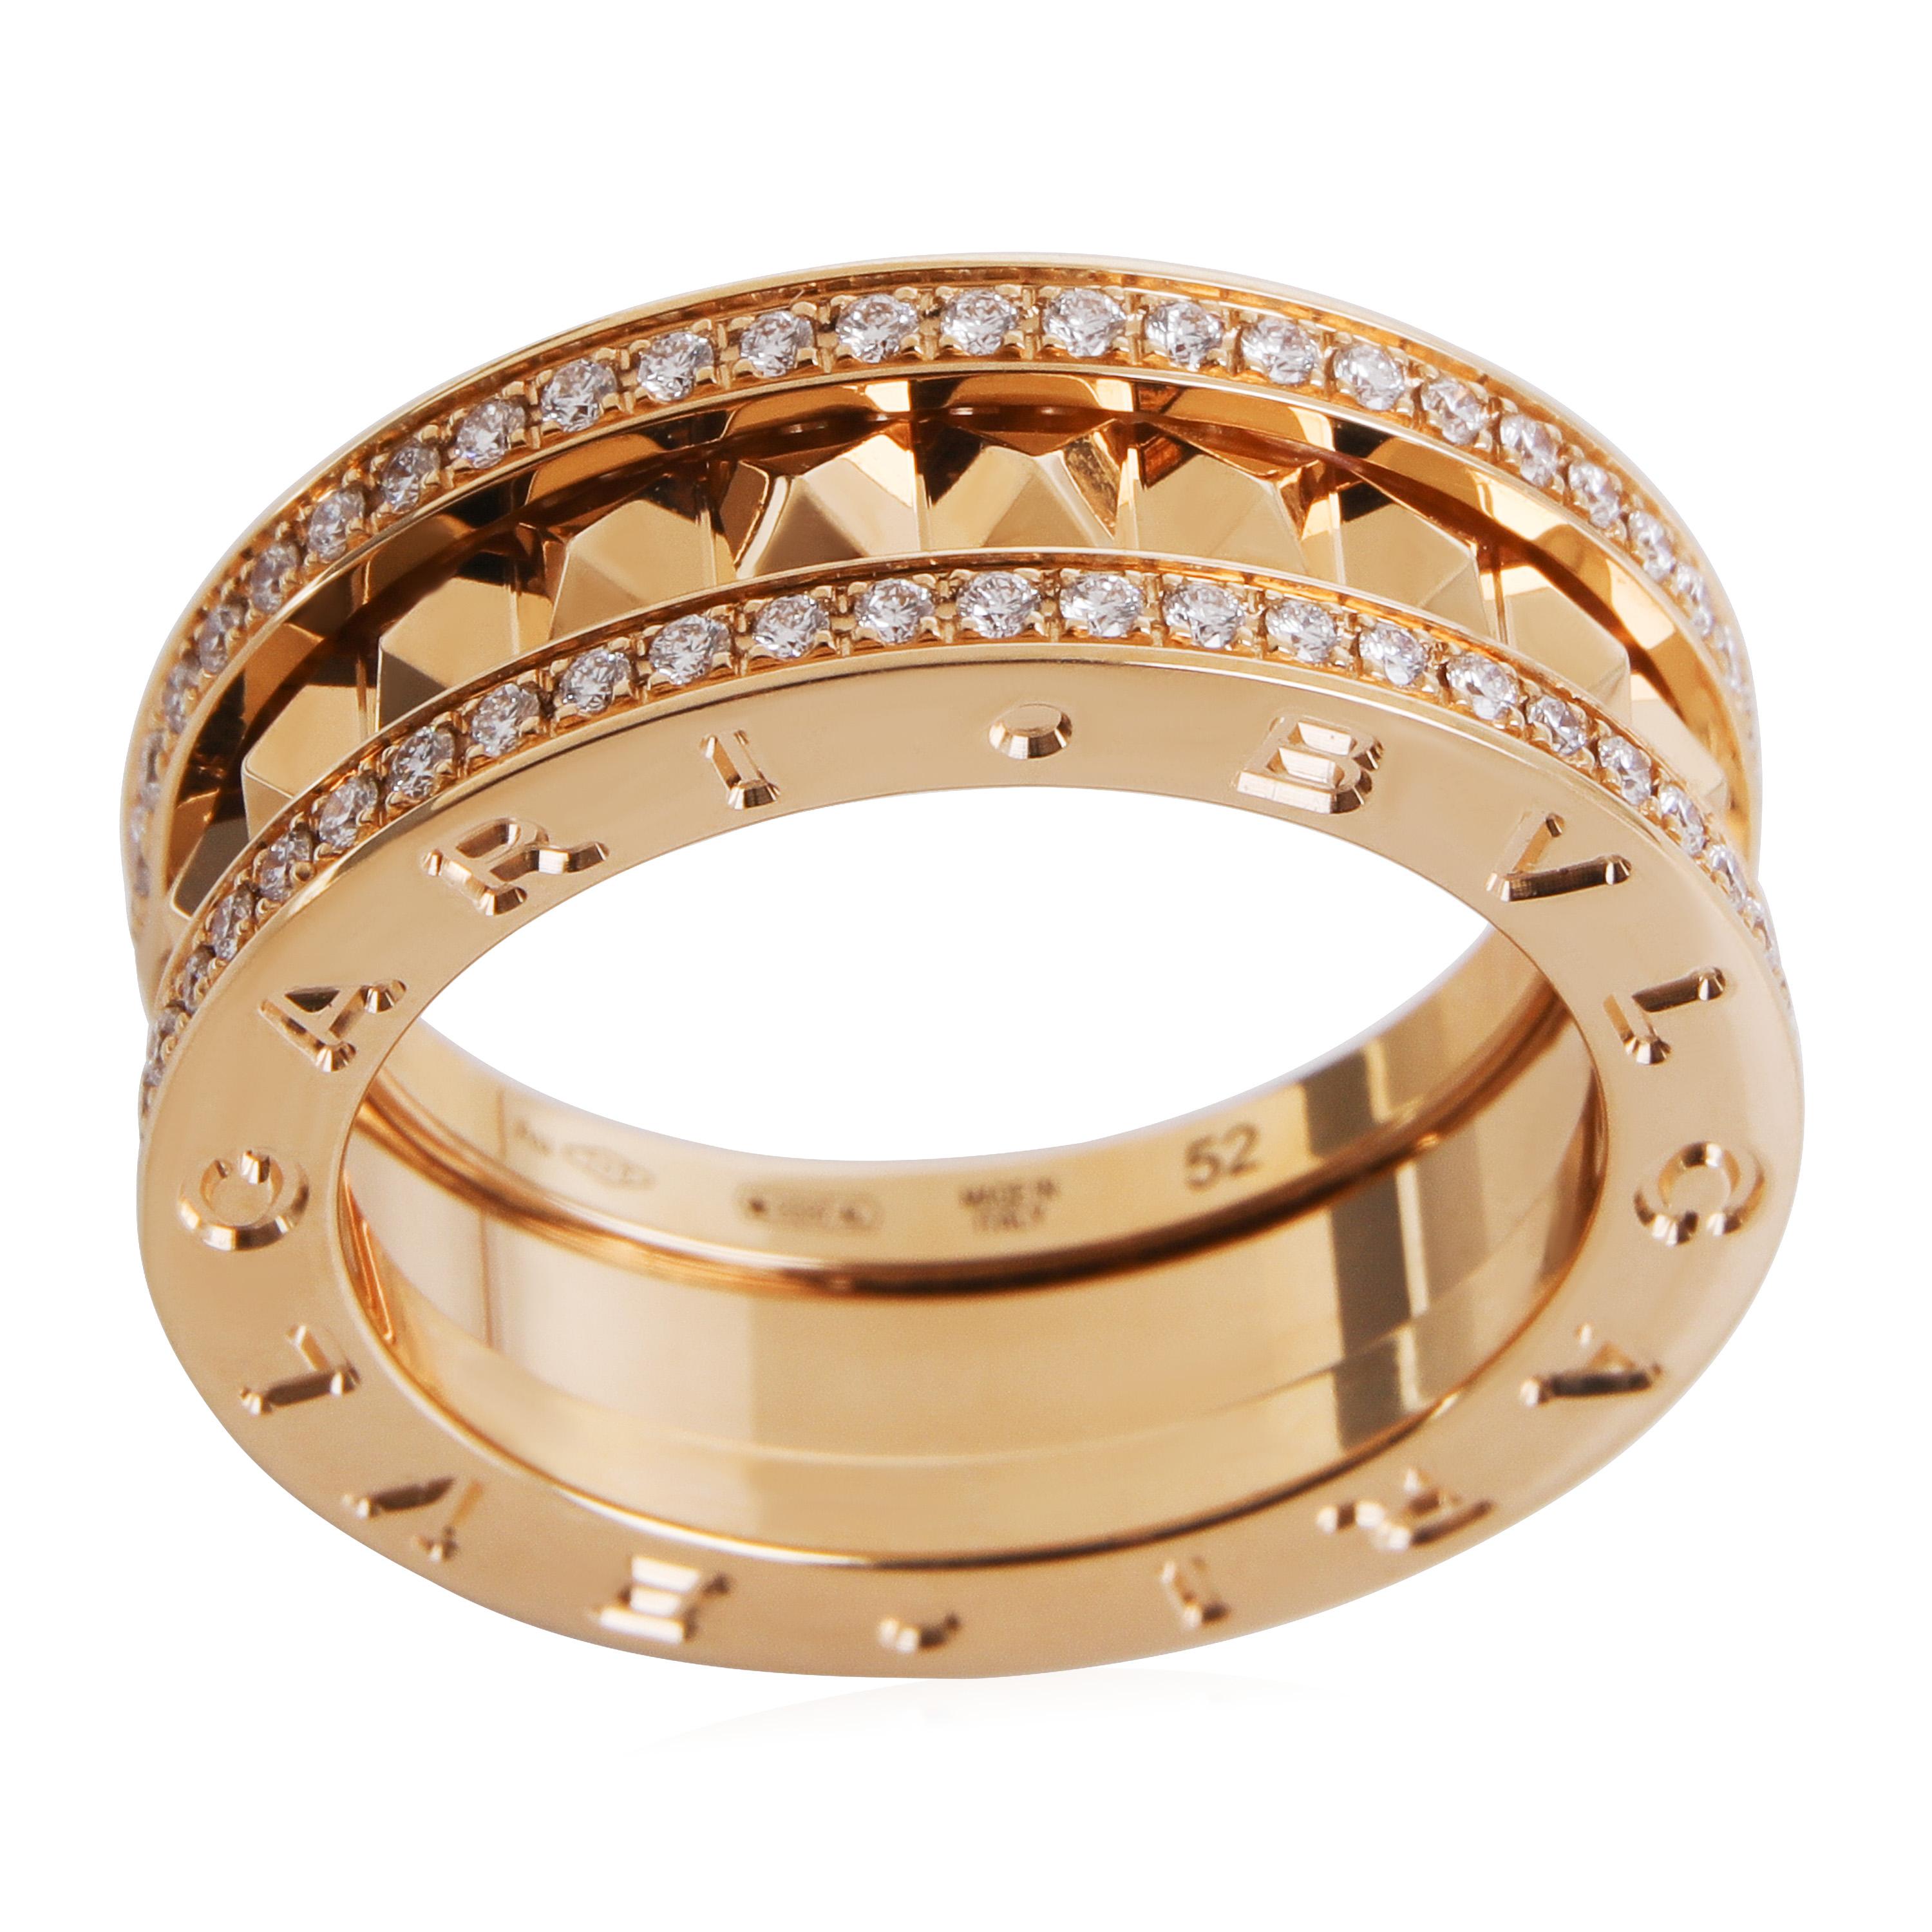 BVLGARI B.zero1 Studded Diamond Ring in 18K Yellow Gold

PRIMARY DETAILS
SKU: 120769
Listing Title: BVLGARI B.zero1 Studded Diamond Ring in 18K Yellow Gold
Condition Description: Retails for 7150 USD. In excellent condition. Ring size is 52. Comes